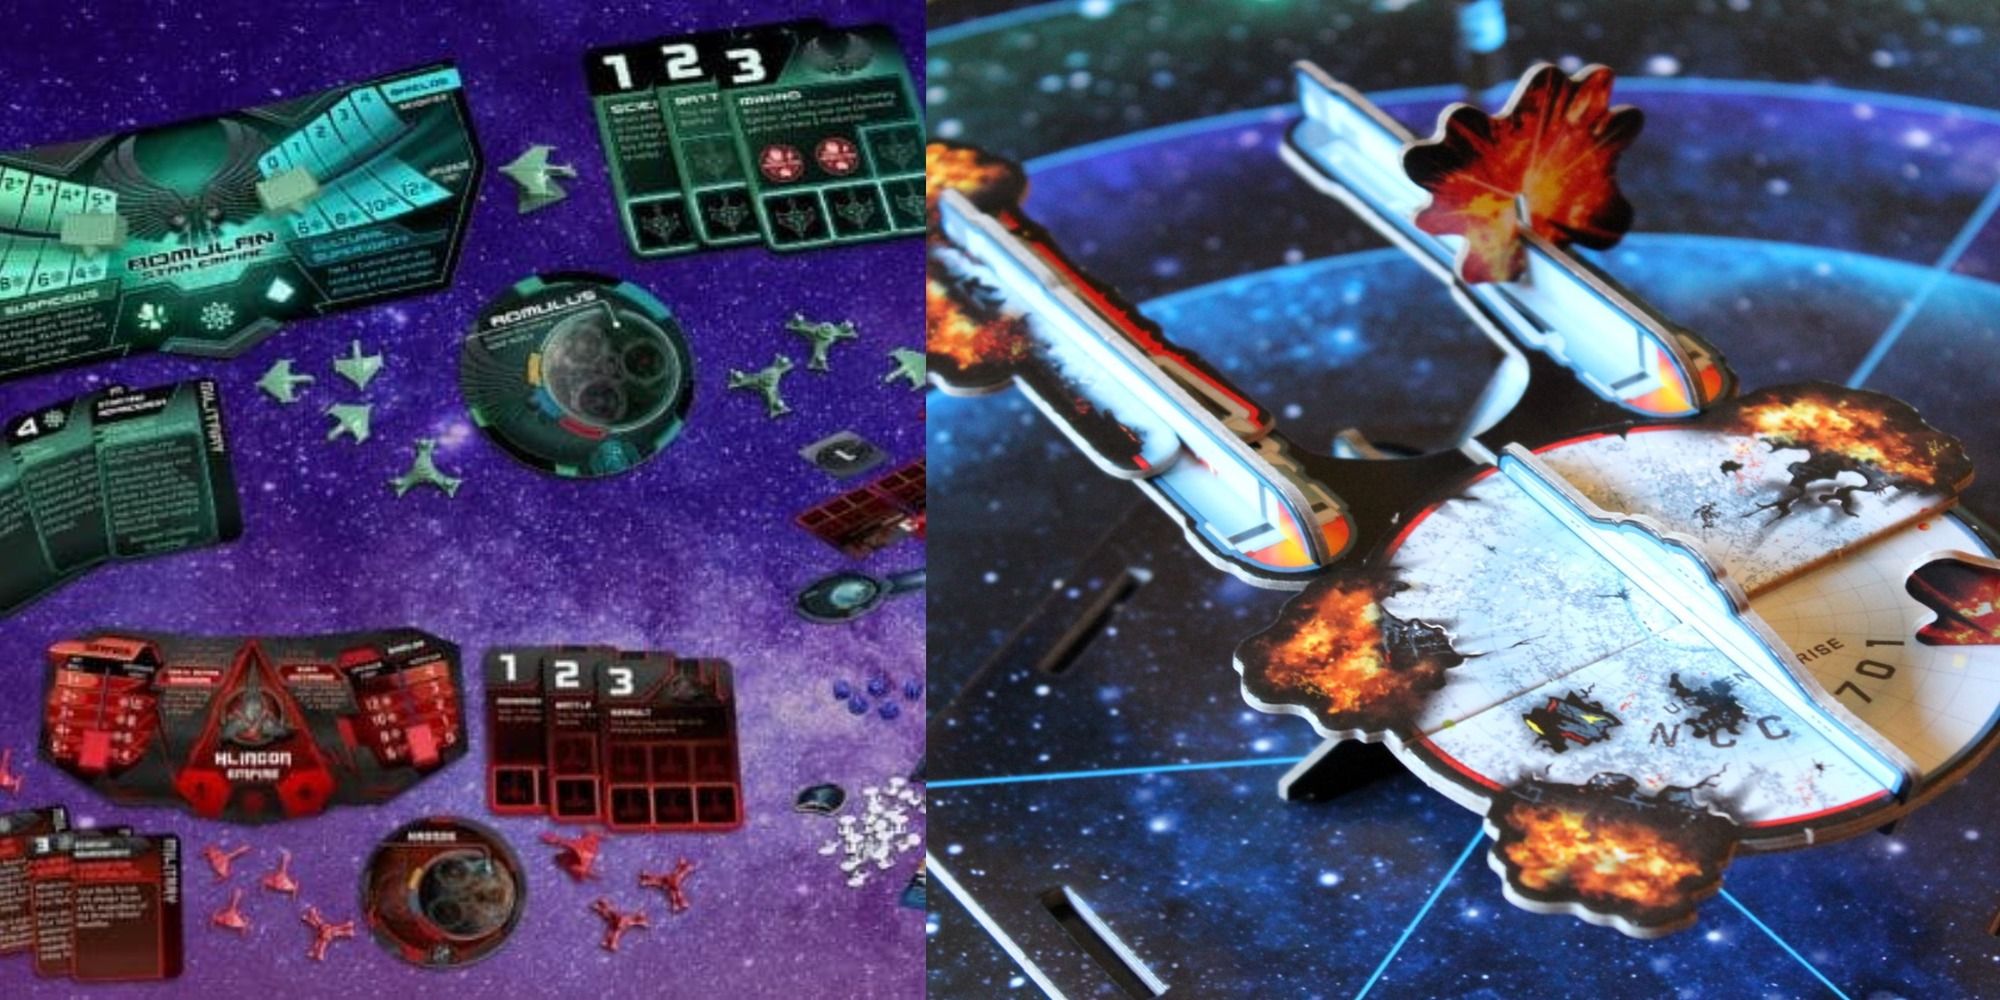 Splt image showing game pieces from the Star Trek Ascendancy and Star Trek Panic! tabletop games.